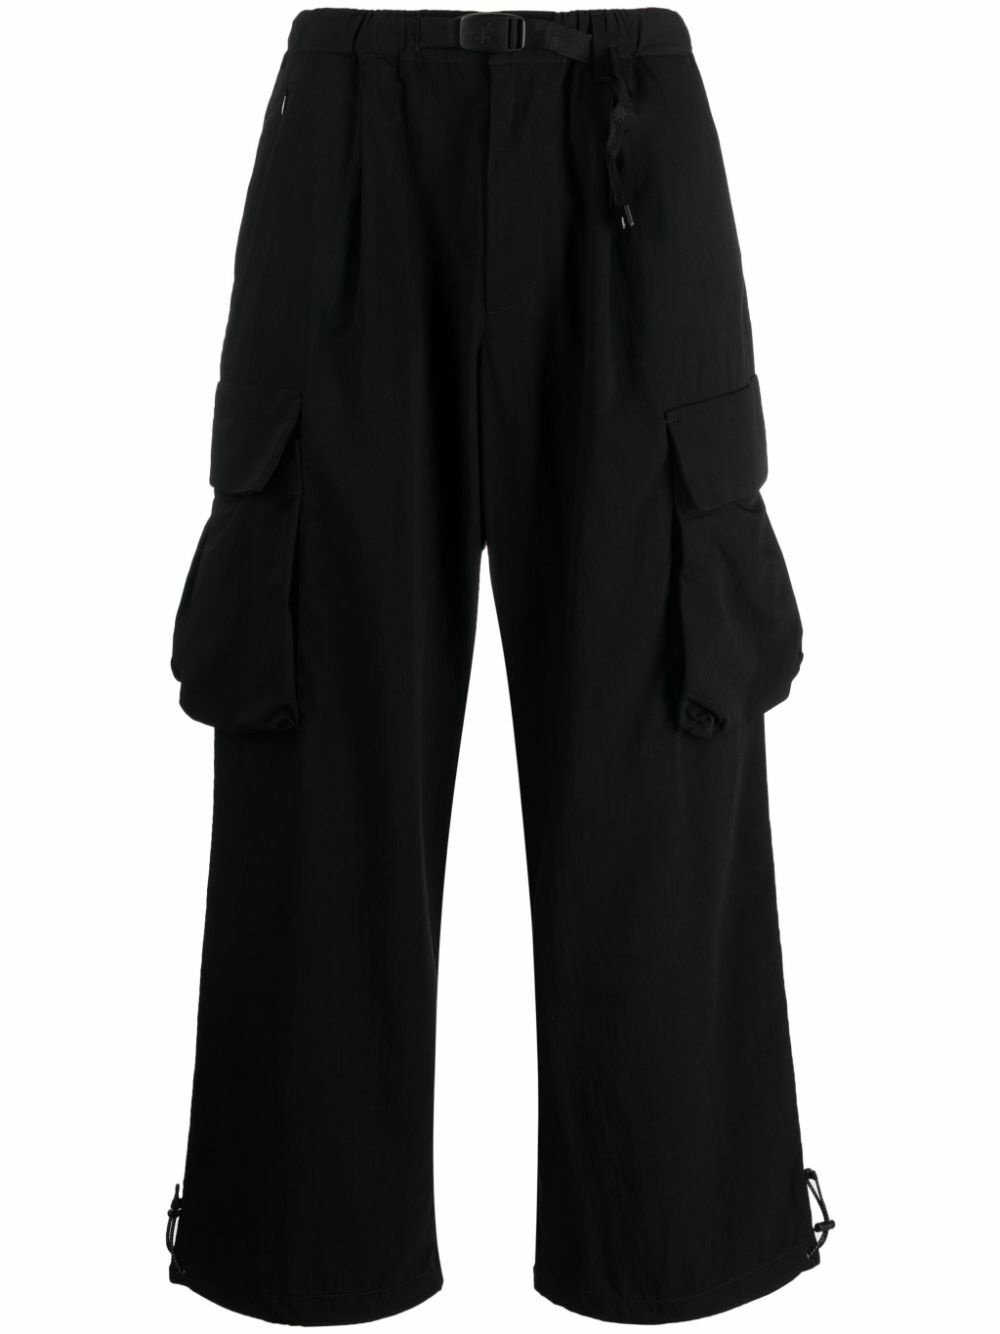 Blooming Jelly Cargo Pants for Women with Pockets High Waist Y2K